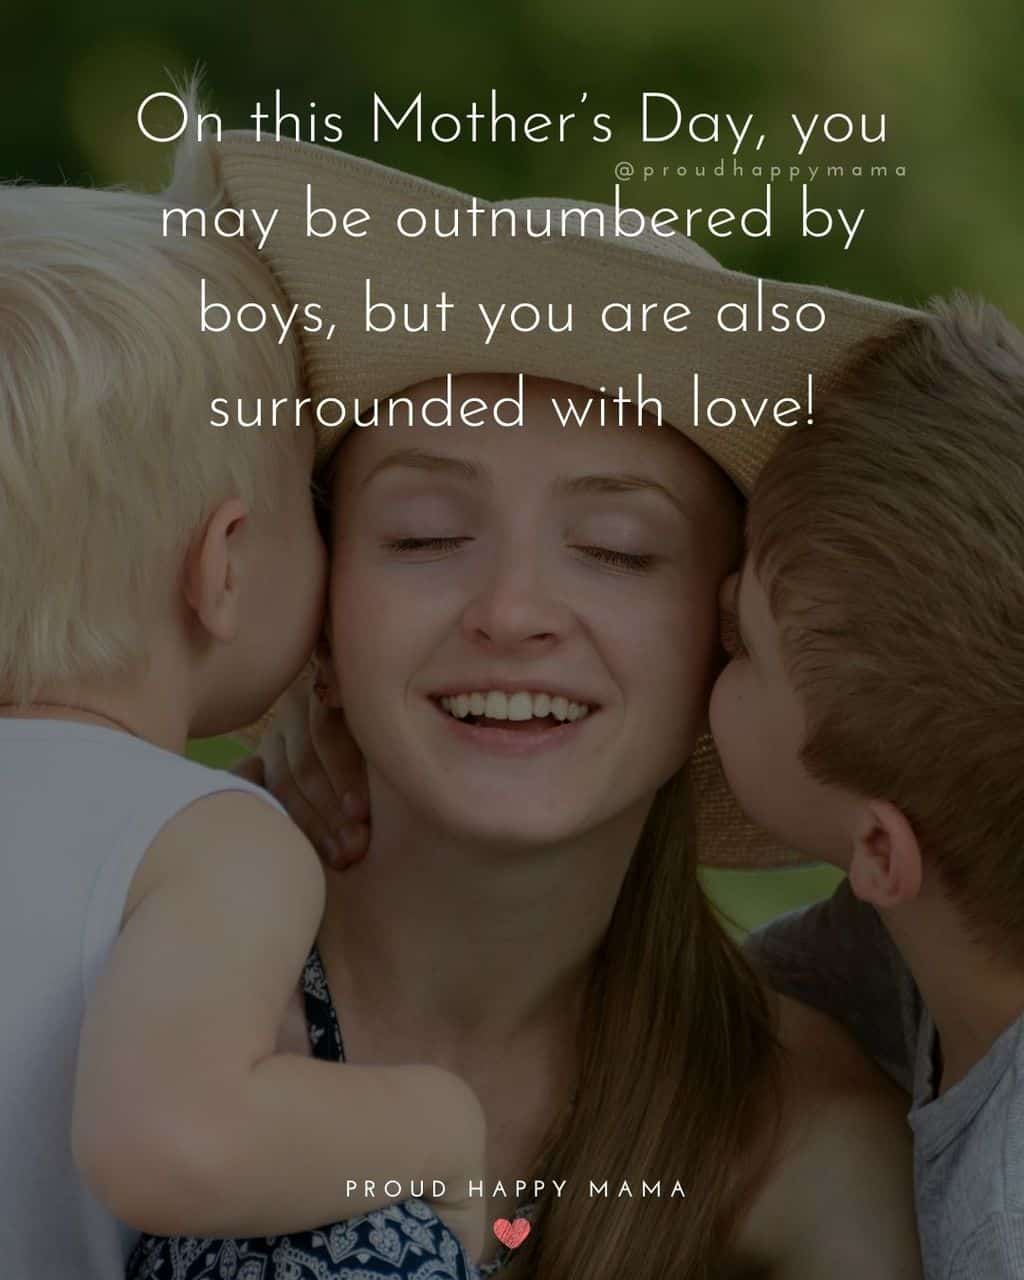 Happy Mothers Day Quotes From Son - On this Mother’s Day, you may be outnumbered by boys, but you are also surrounded